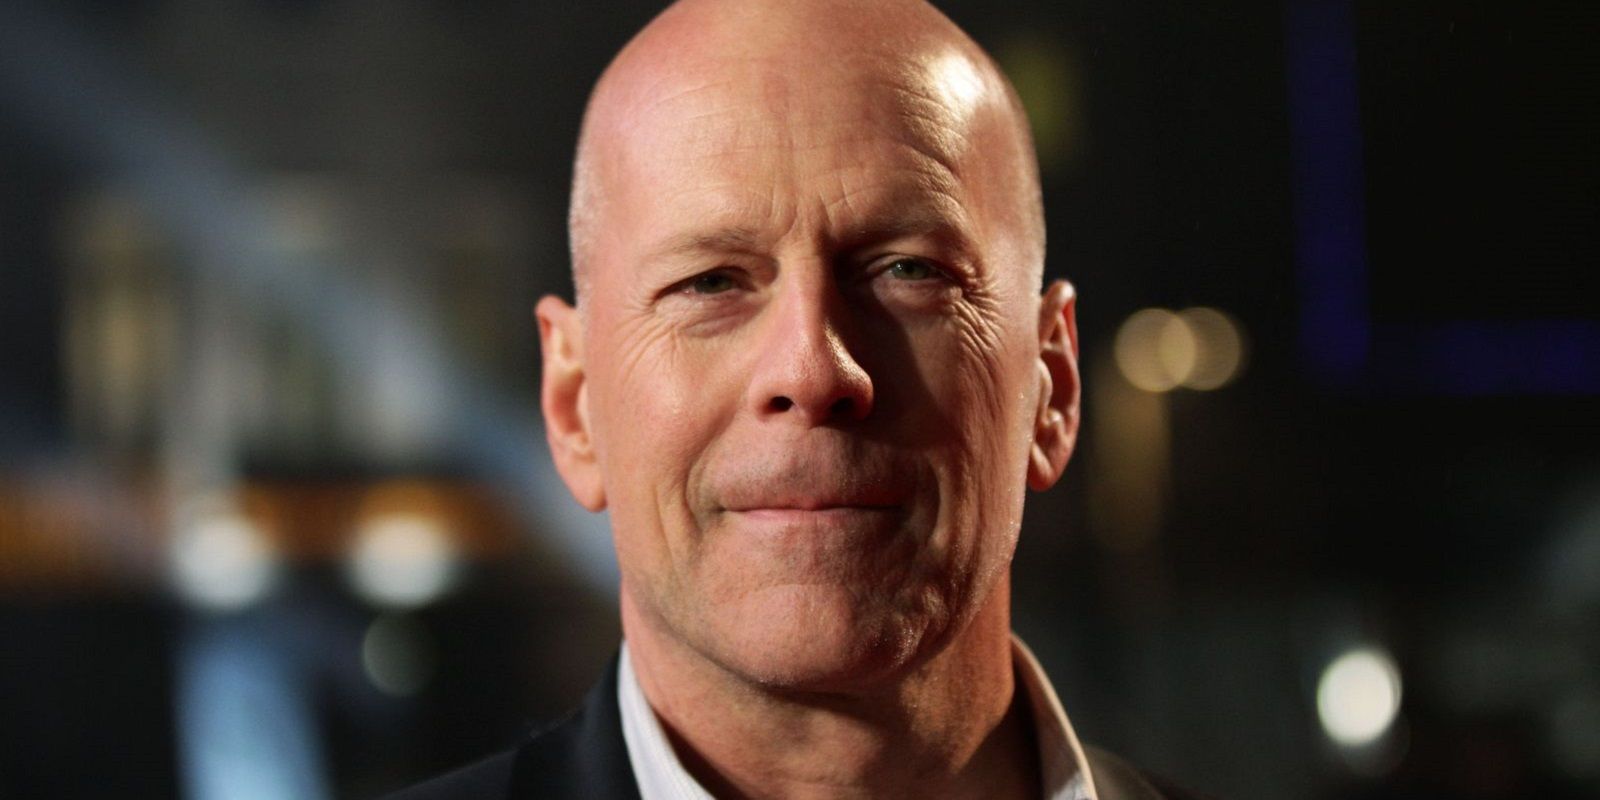 Bruce Willis smirks as he looks at the camera